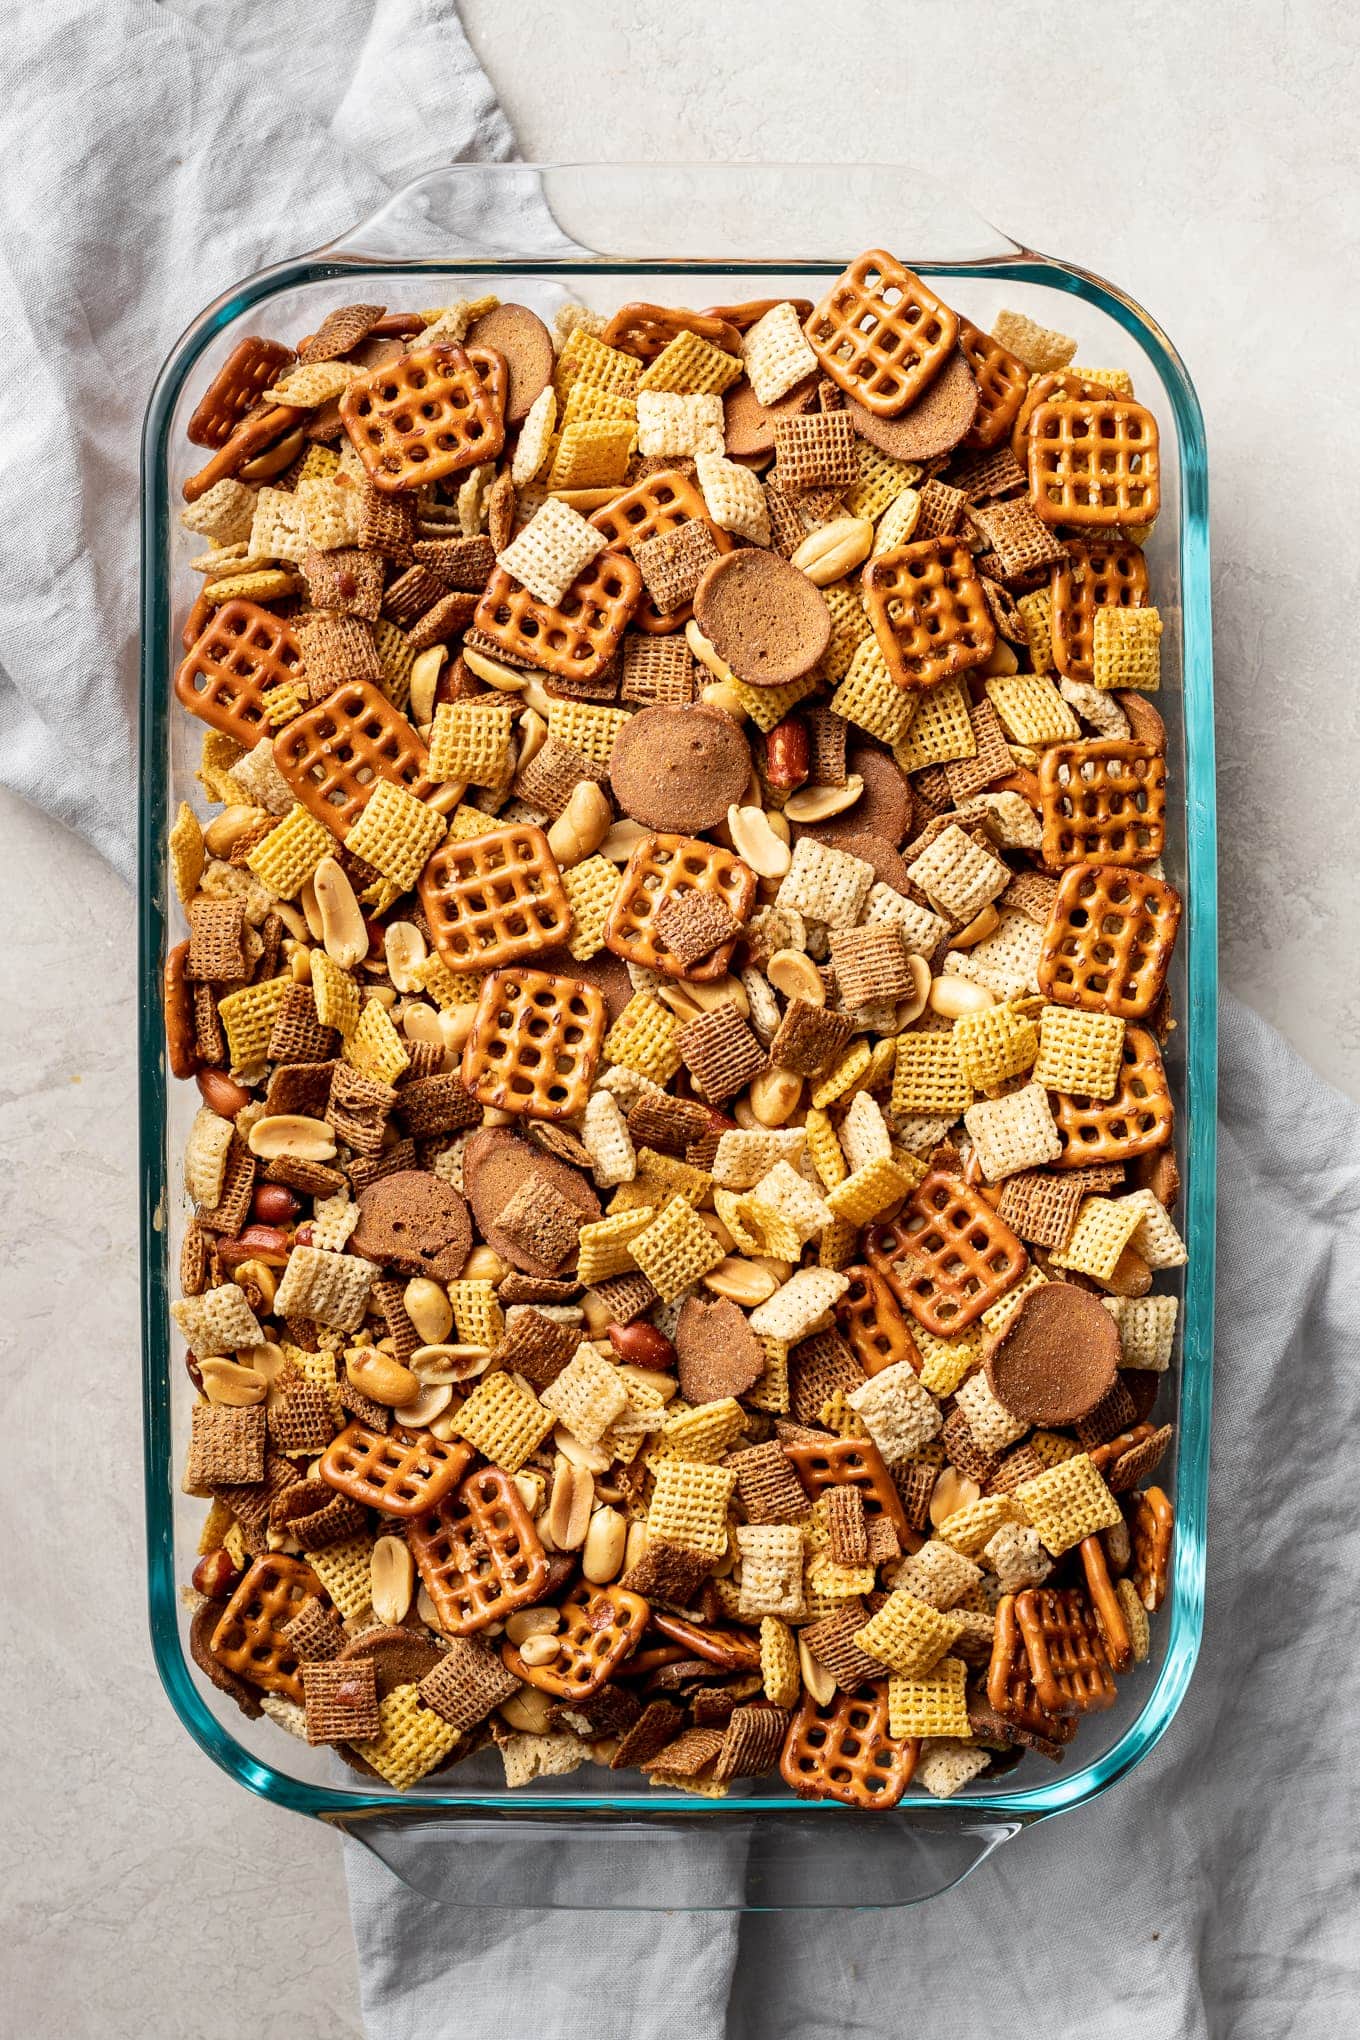 The best part of the Gardetto's snack mix, the rye chips, now come